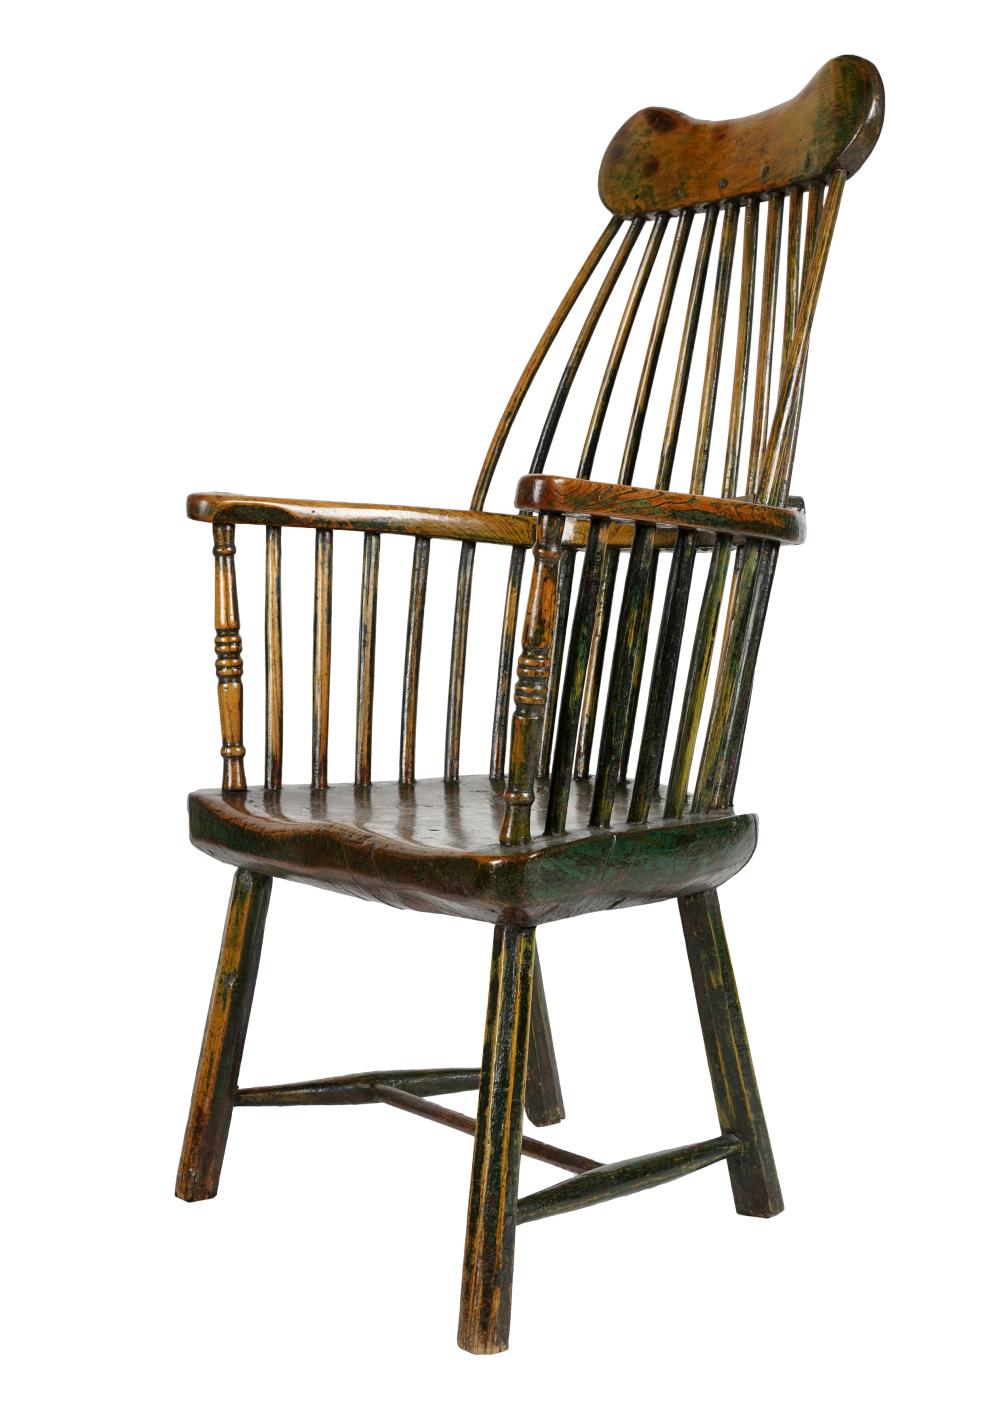 ANTIQUE GREEN-PAINTED WINDSOR CHAIRProvenance: